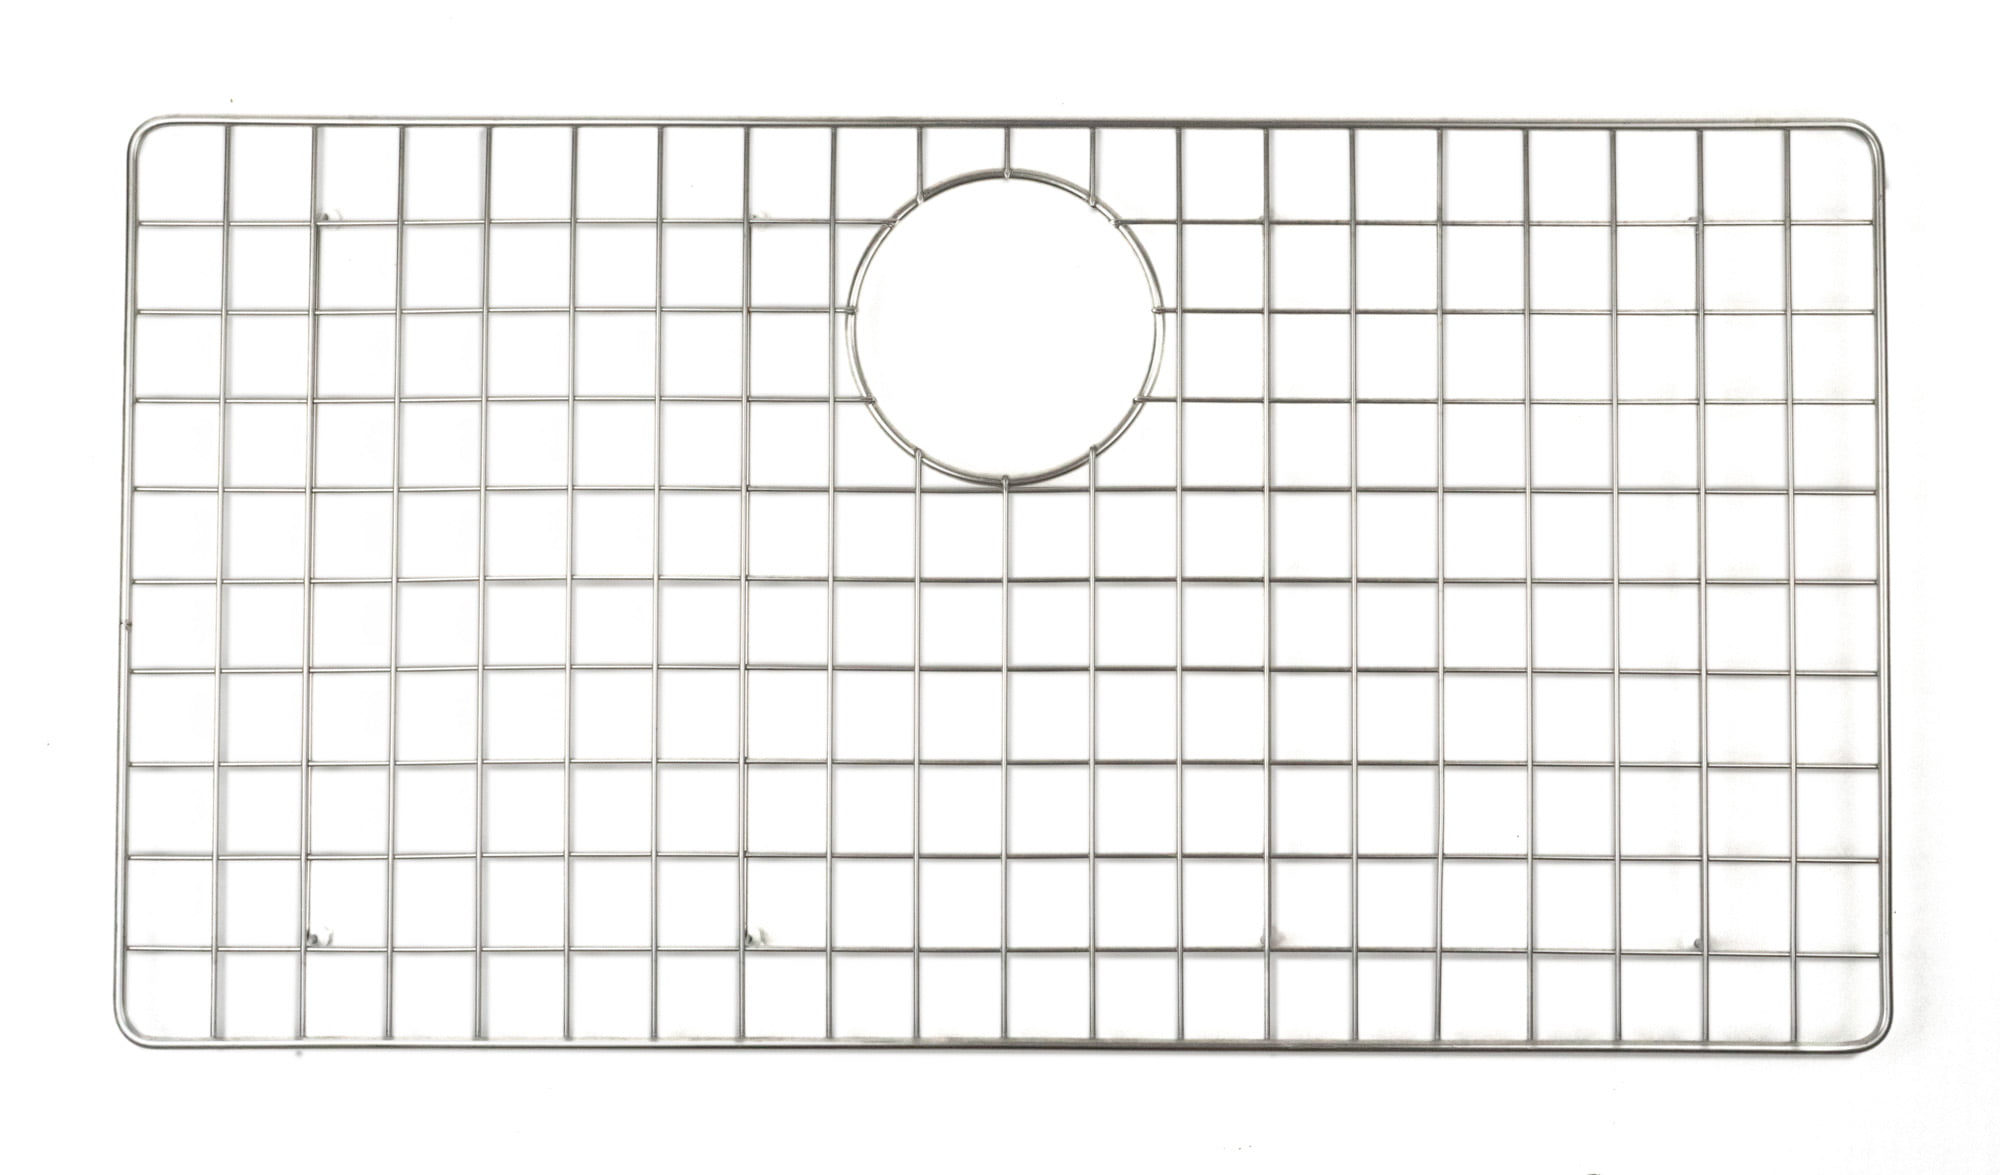 Abgr3322 Stainless Steel Grid For Ab3322di & Ab3322um